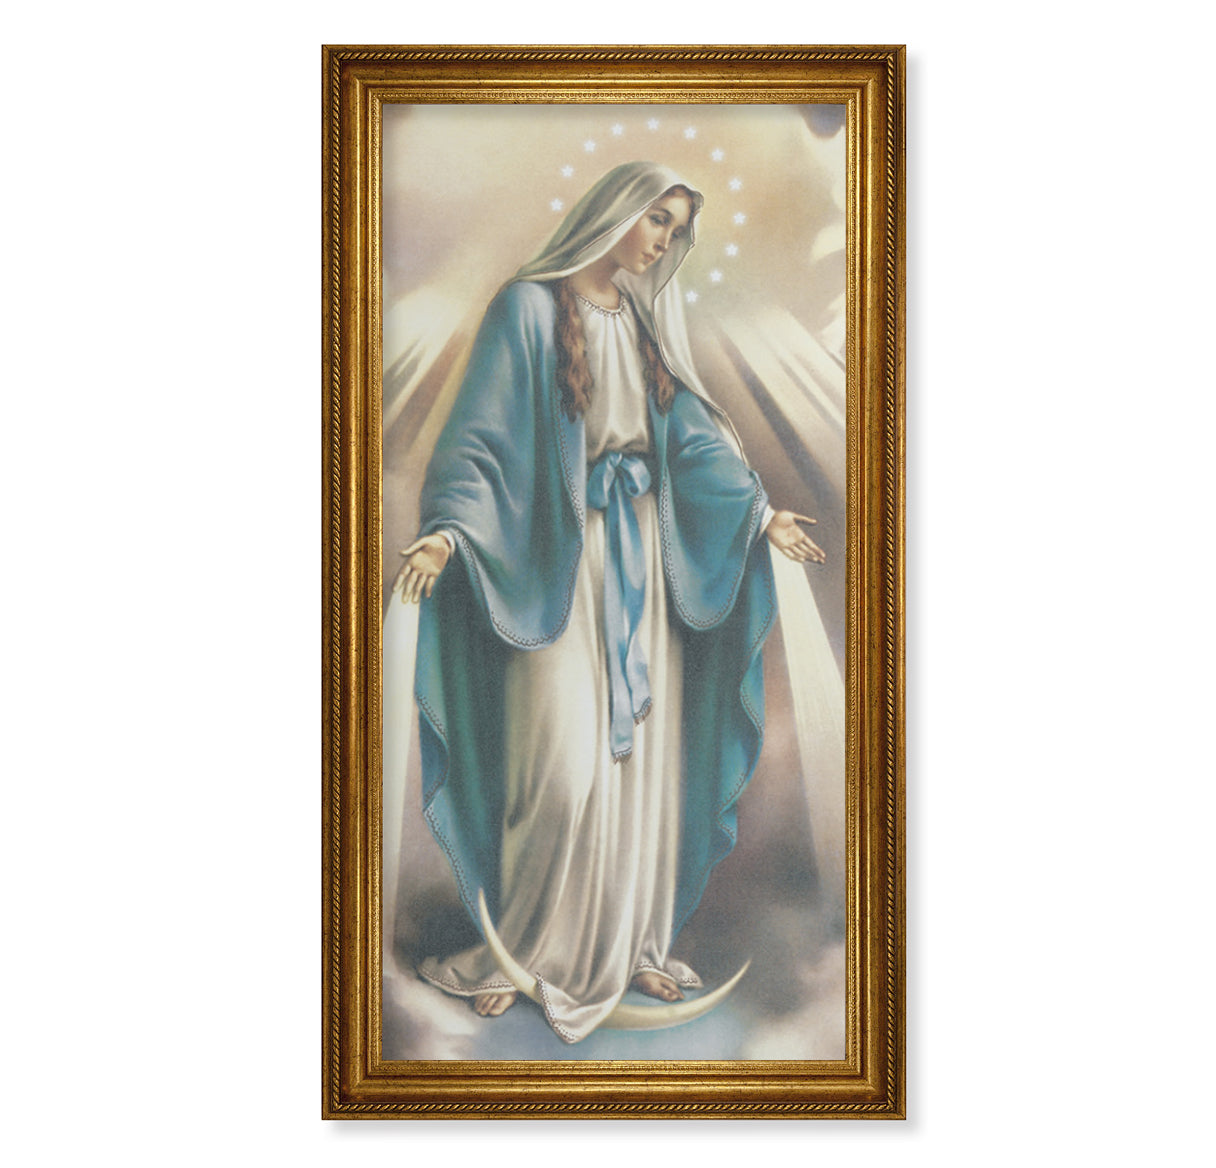 Our Lady of Grace Antique Gold Framed Canvas Art